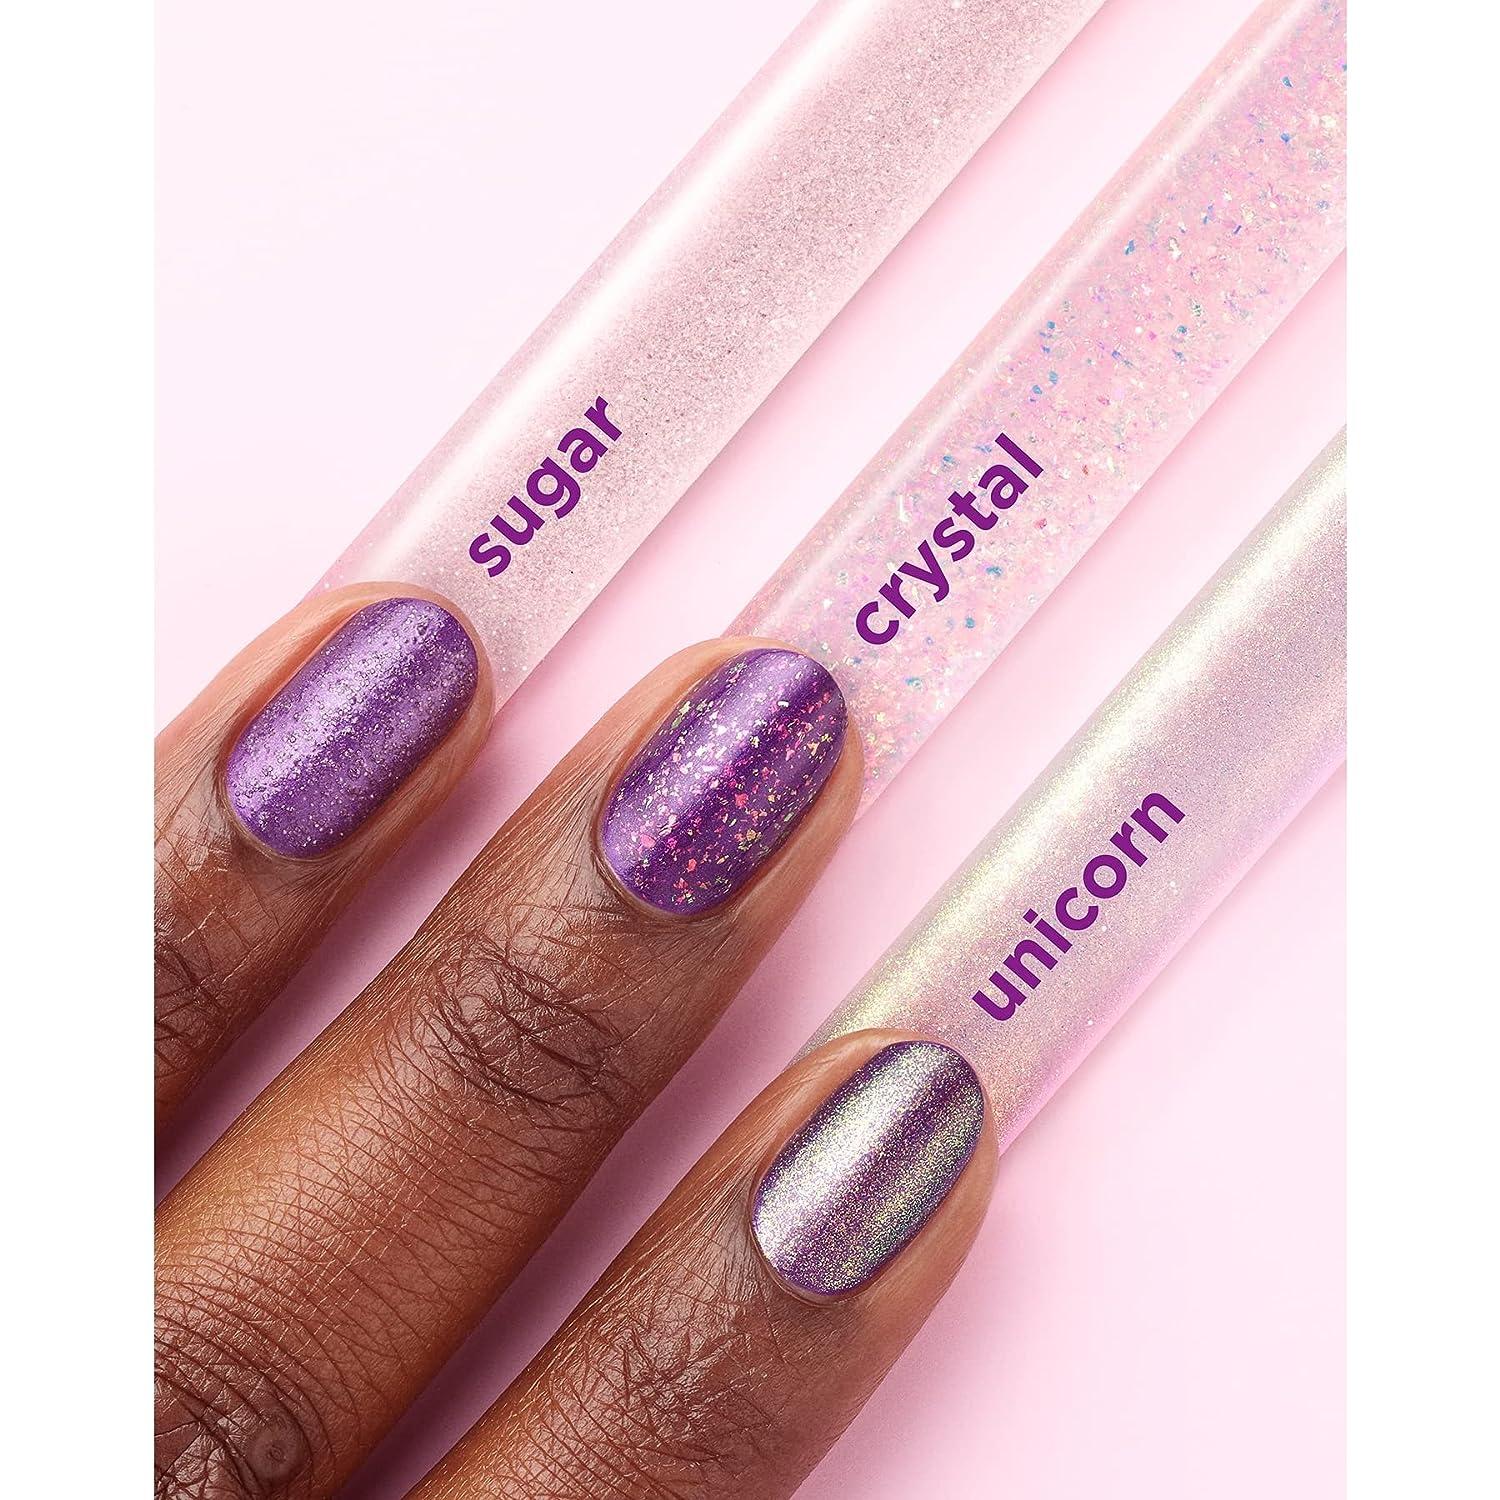 Buy SUGAR Cosmetics Tip Tac Toe Nail Lacquer - 069 Graduation Grey (Pastel  Grey) Online at Low Prices in India - Amazon.in